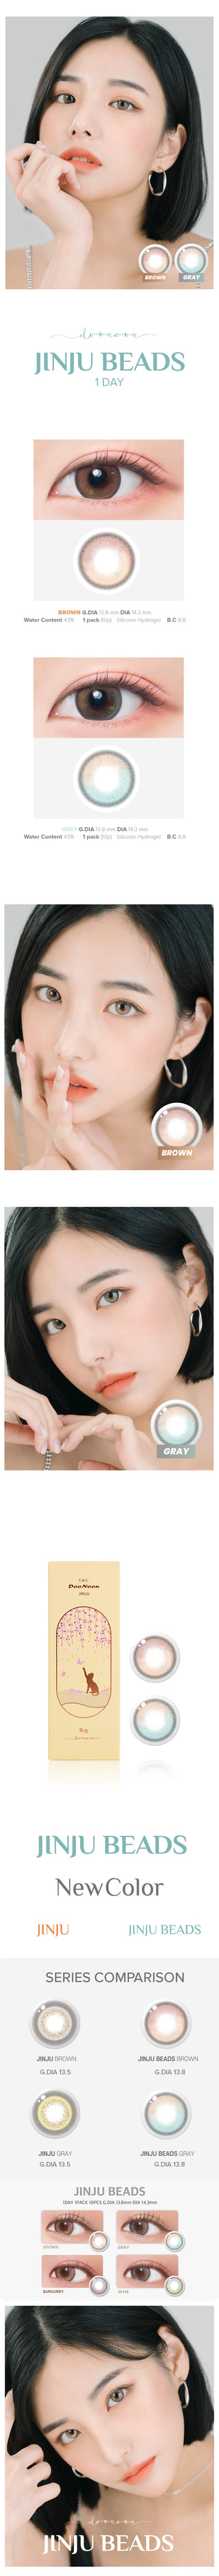 Variety of DooNoon Jinju Beads 1-Day Brown (10pk) contact lens colors displayed, with closeups of an eye wearing the contact lens colors, and with a model wearing the contact lens colors showing realistic eye-enlarging effect from various angles.